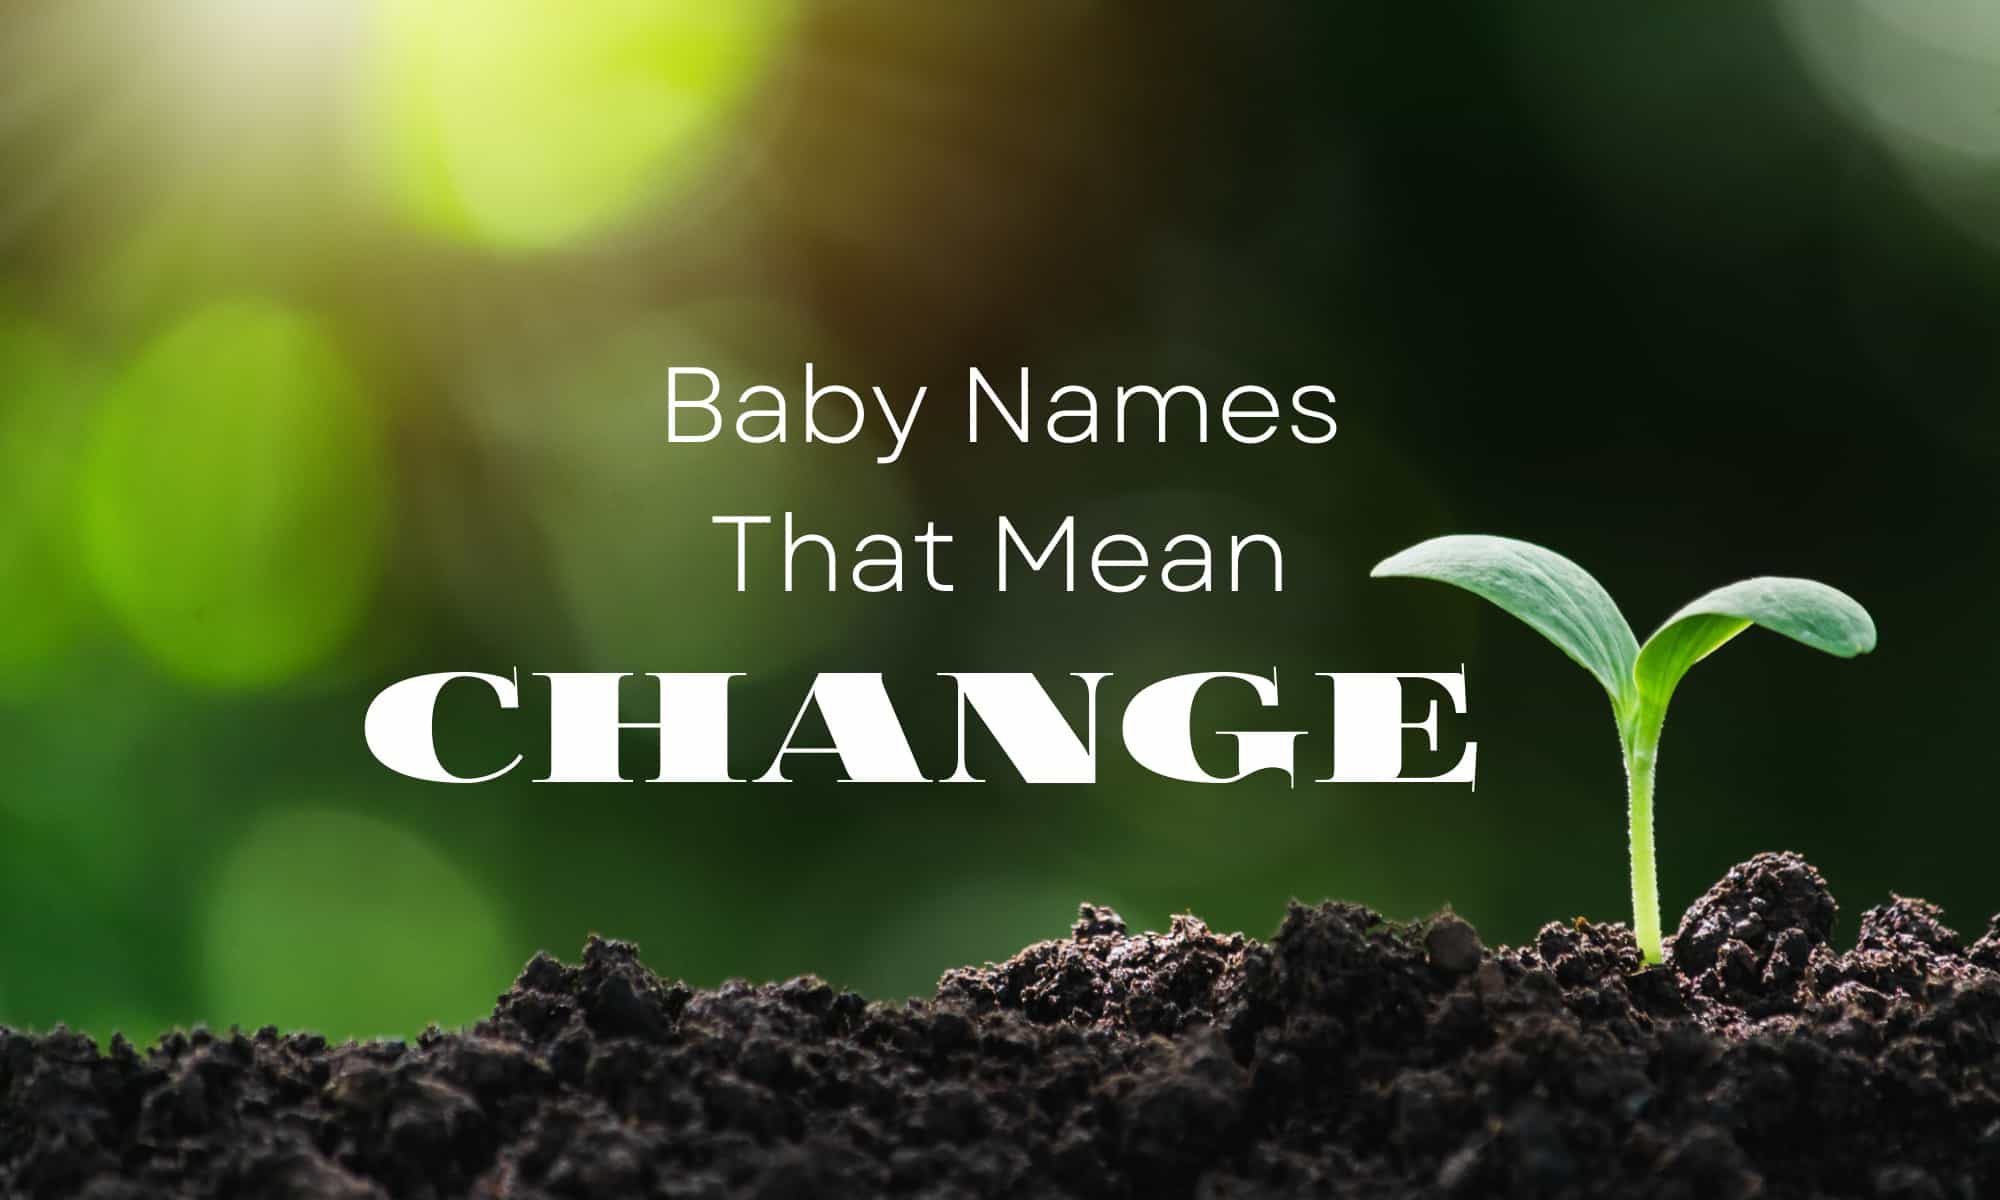 Baby Names That Mean Change